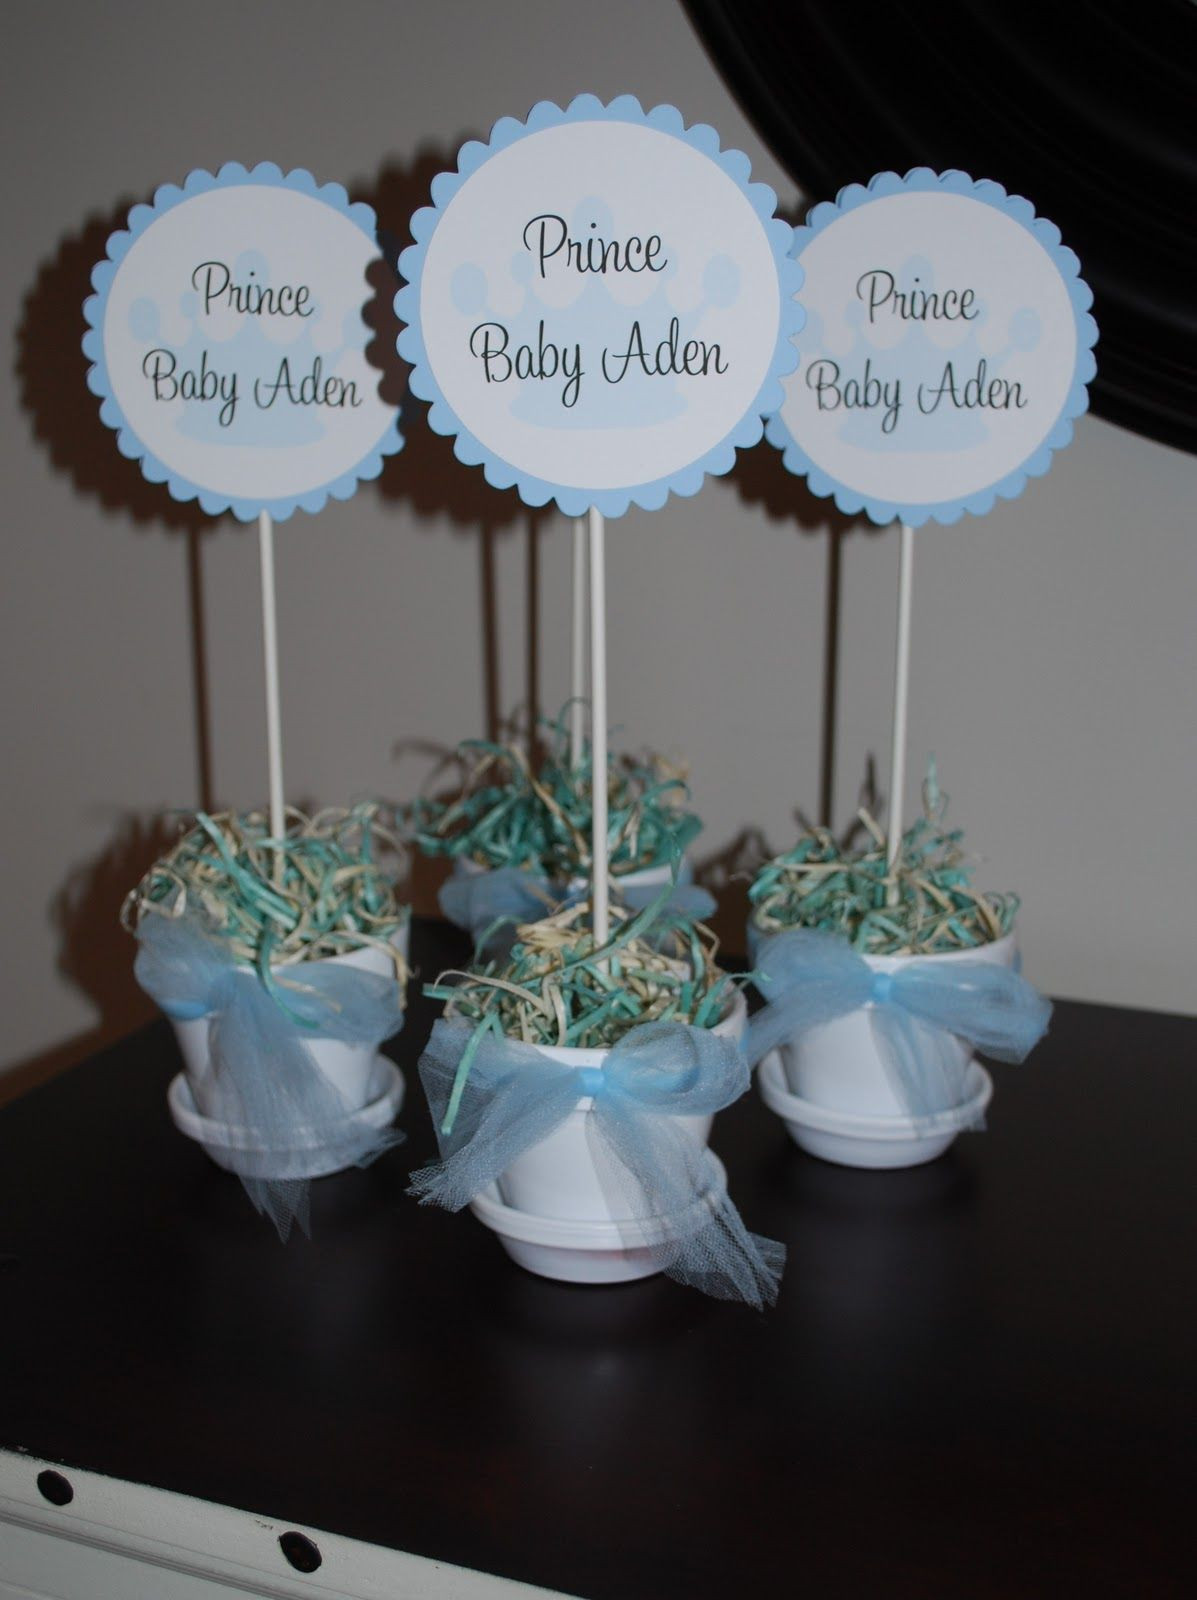 Gift Table Baby Shower Ideas
 Homemade Baby Shower Centerpieces